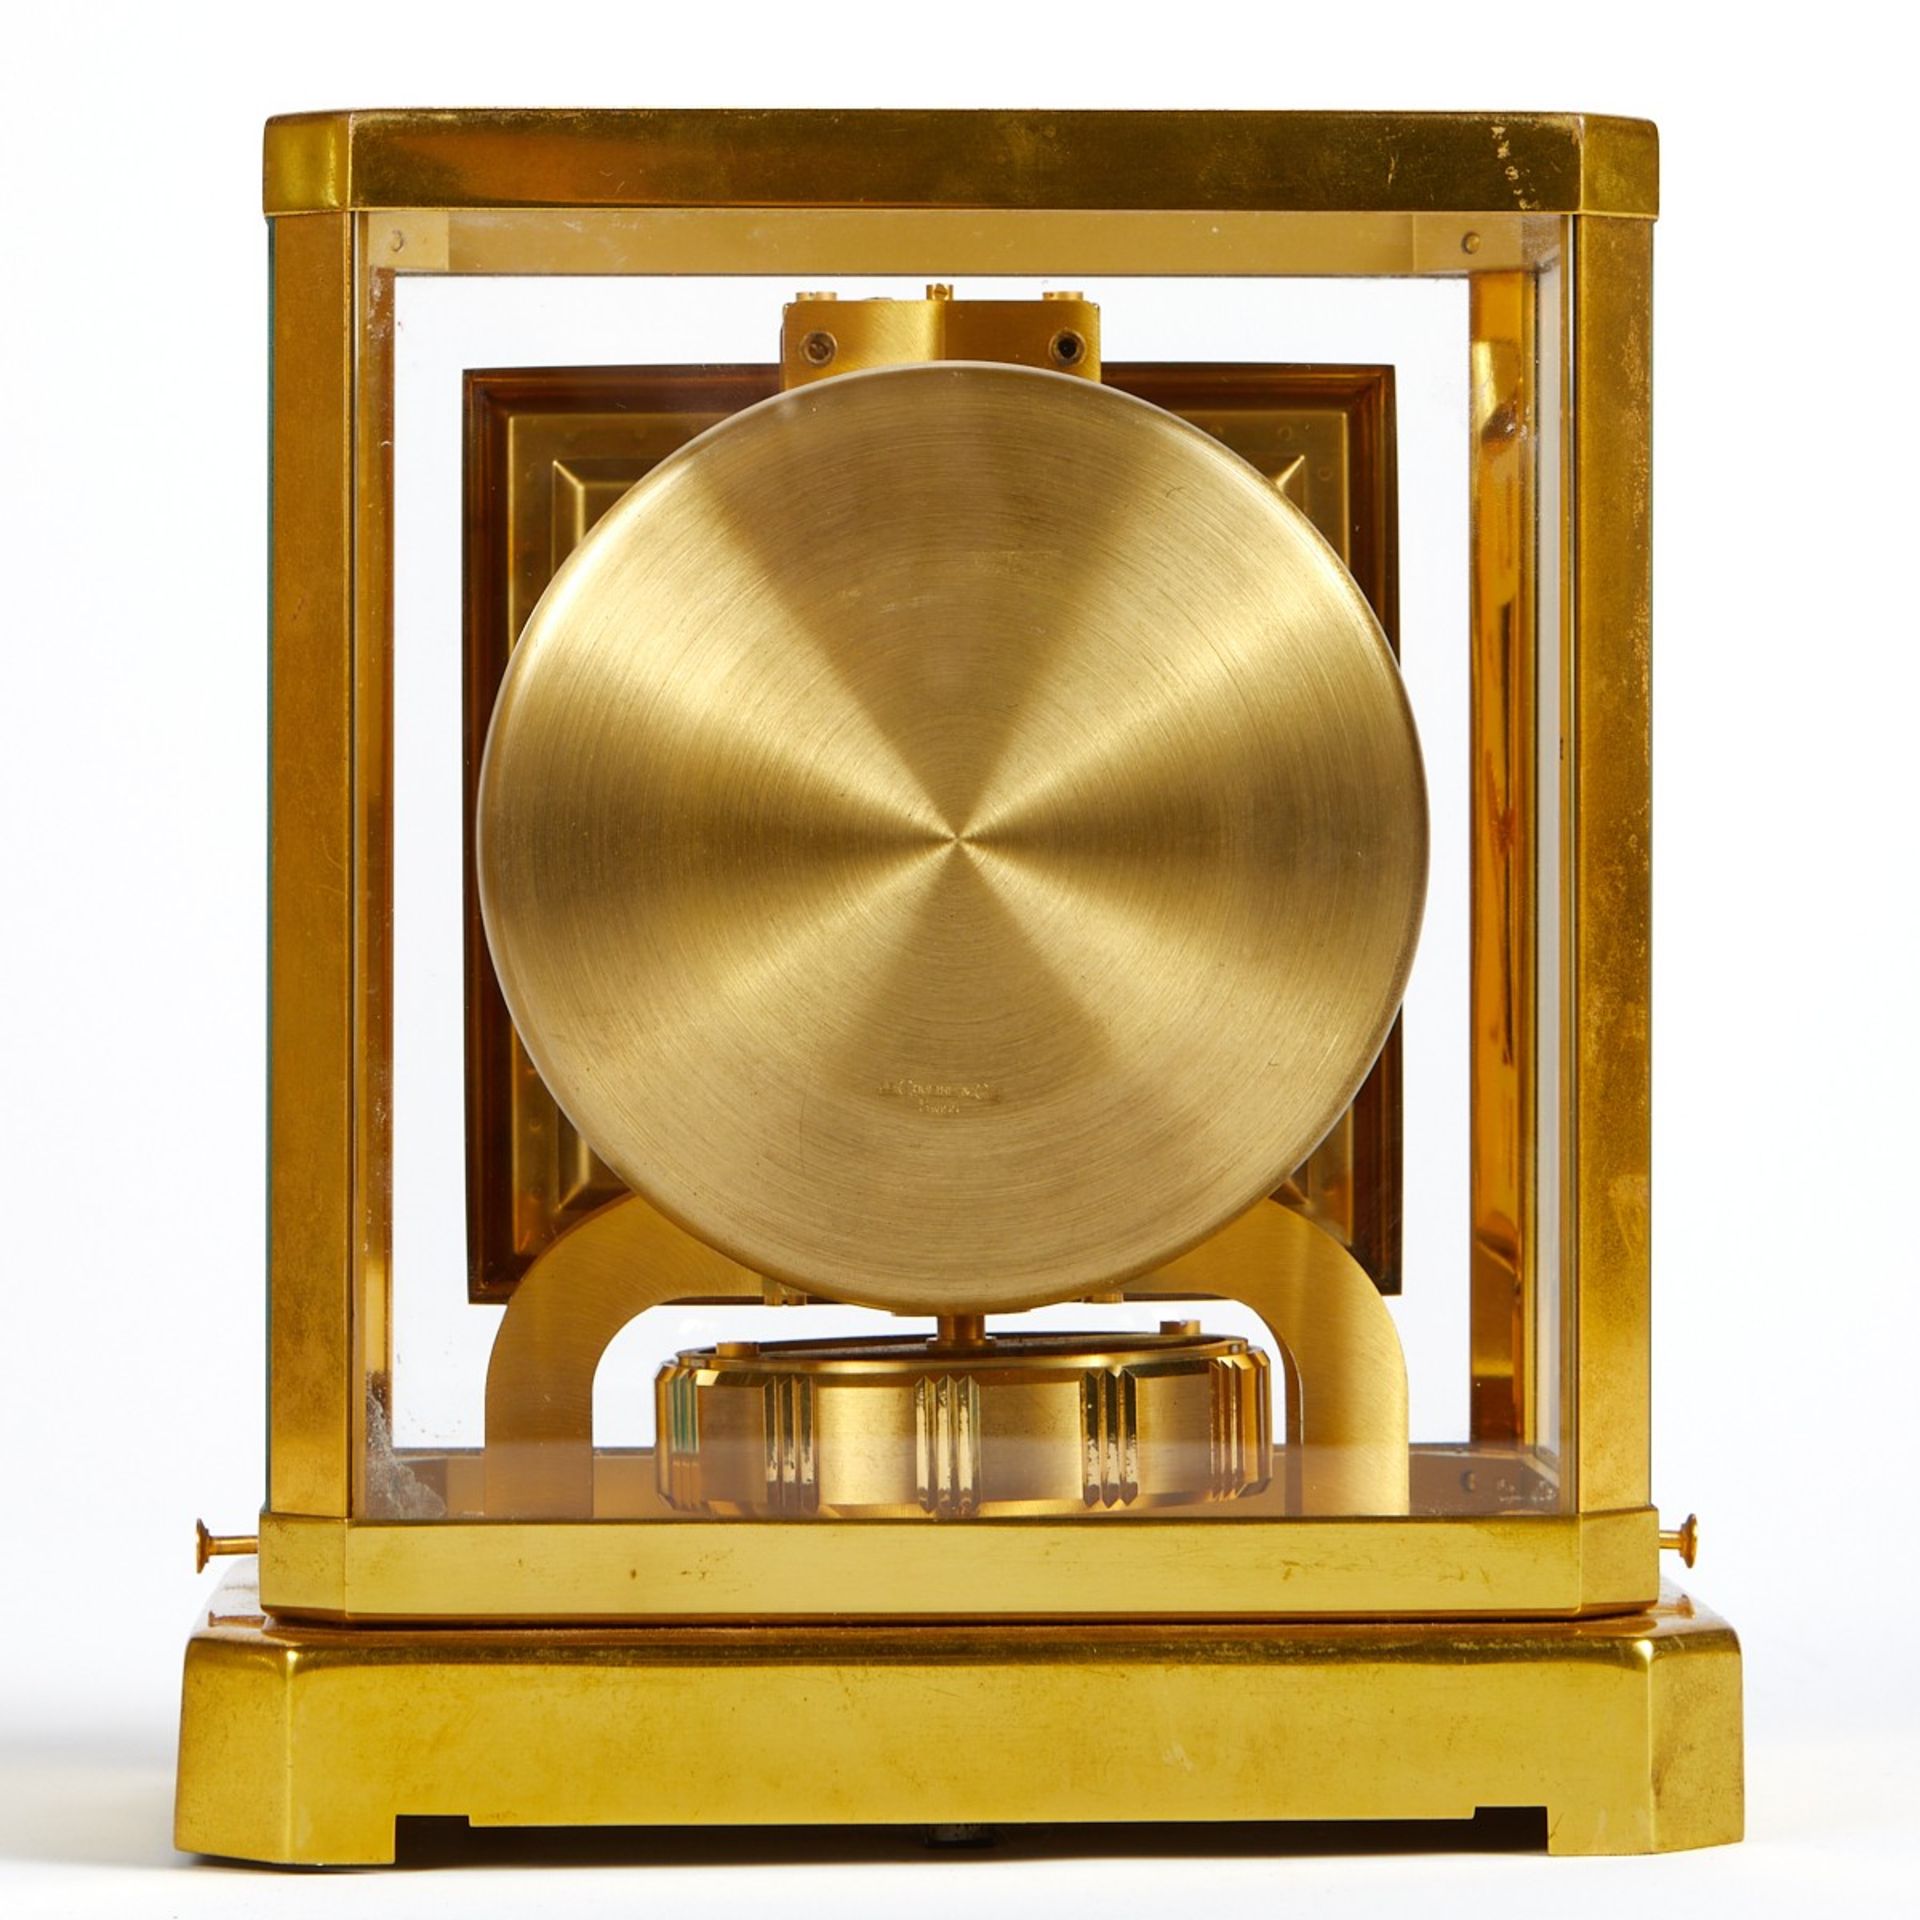 Jaeger LeCoultre Gold Atmos Table Clock - Image 4 of 7